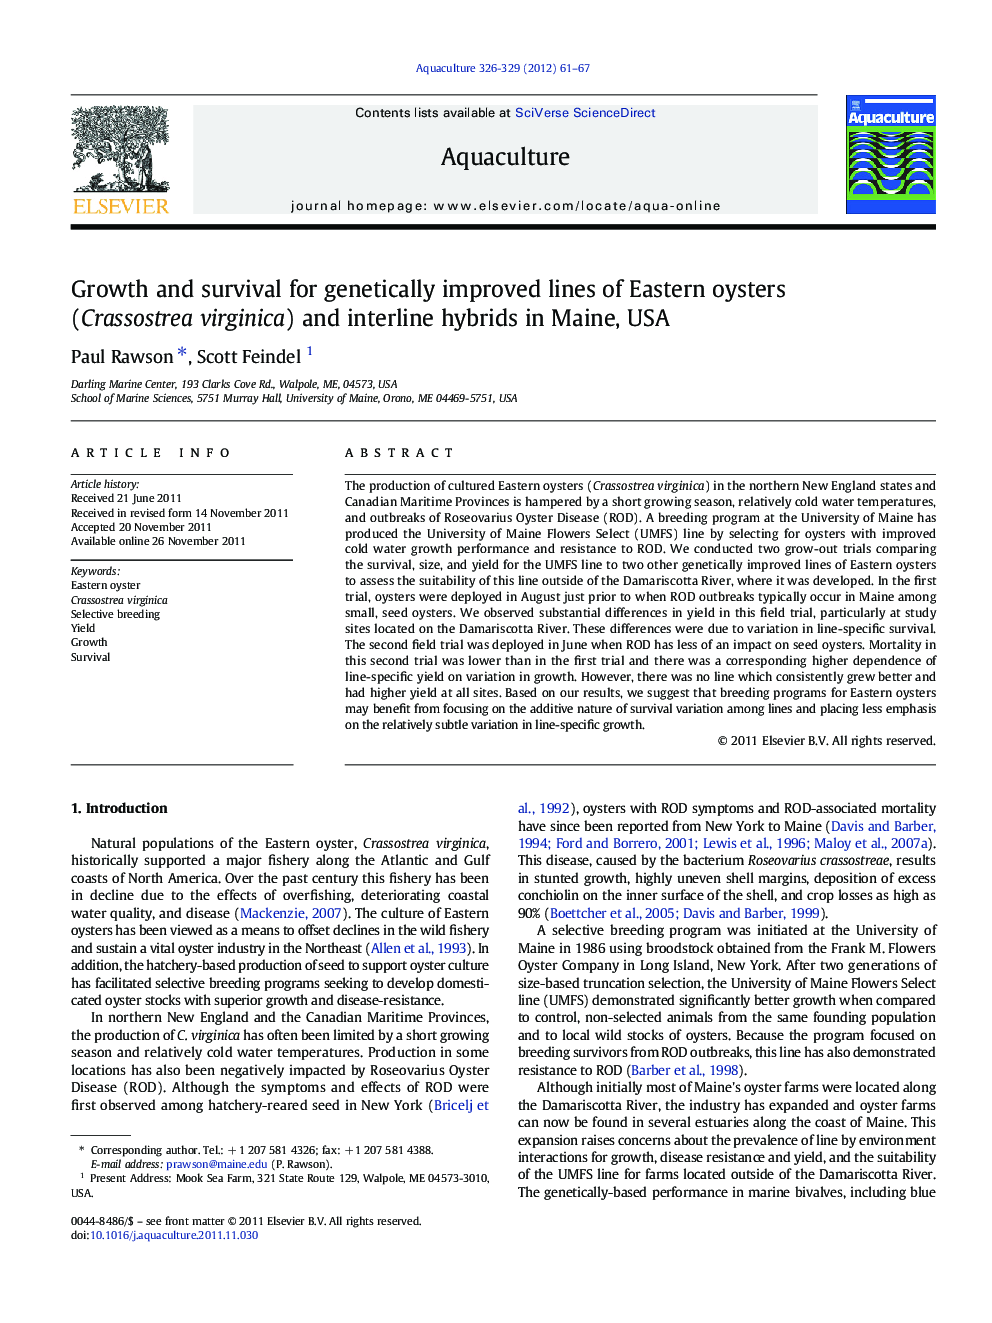 Growth and survival for genetically improved lines of Eastern oysters (Crassostrea virginica) and interline hybrids in Maine, USA